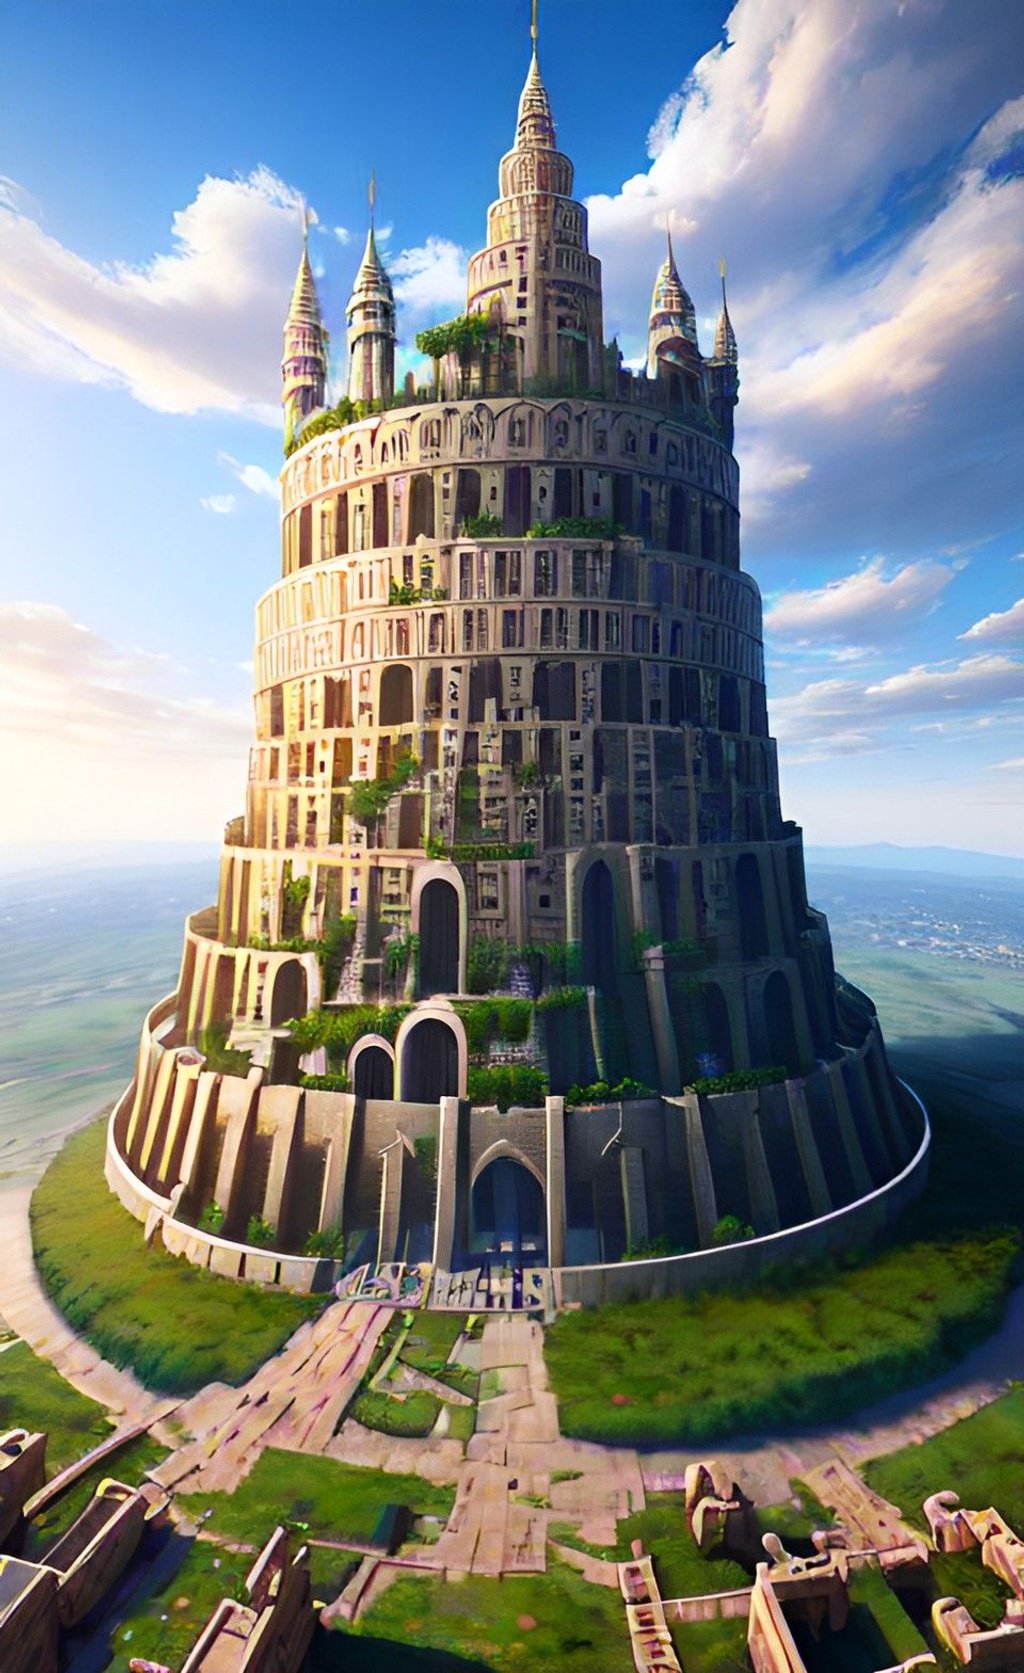 Prompt: "Explore the mythical Tower of Babel in a hyper-realistic and extra-detailed journey powered by Unreal Engine. Describe the awe-inspiring architecture and intricate designs that make this virtual experience truly extraordinary."